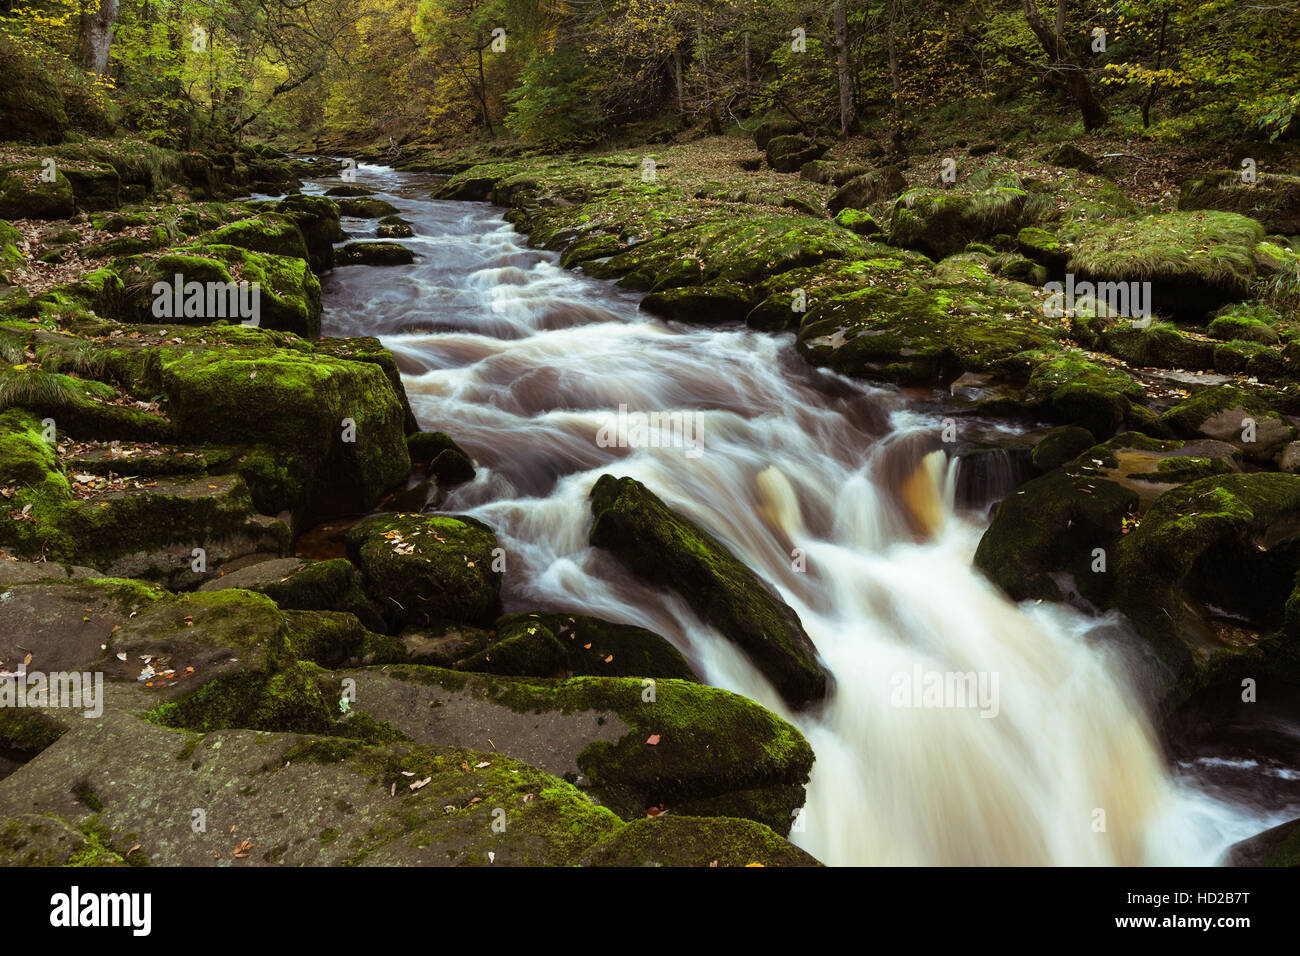 Autumn view of the River Wharfe at The Strid between Barden and Bolton Abbey, Yorkshire Dales National Park, Stock Photo